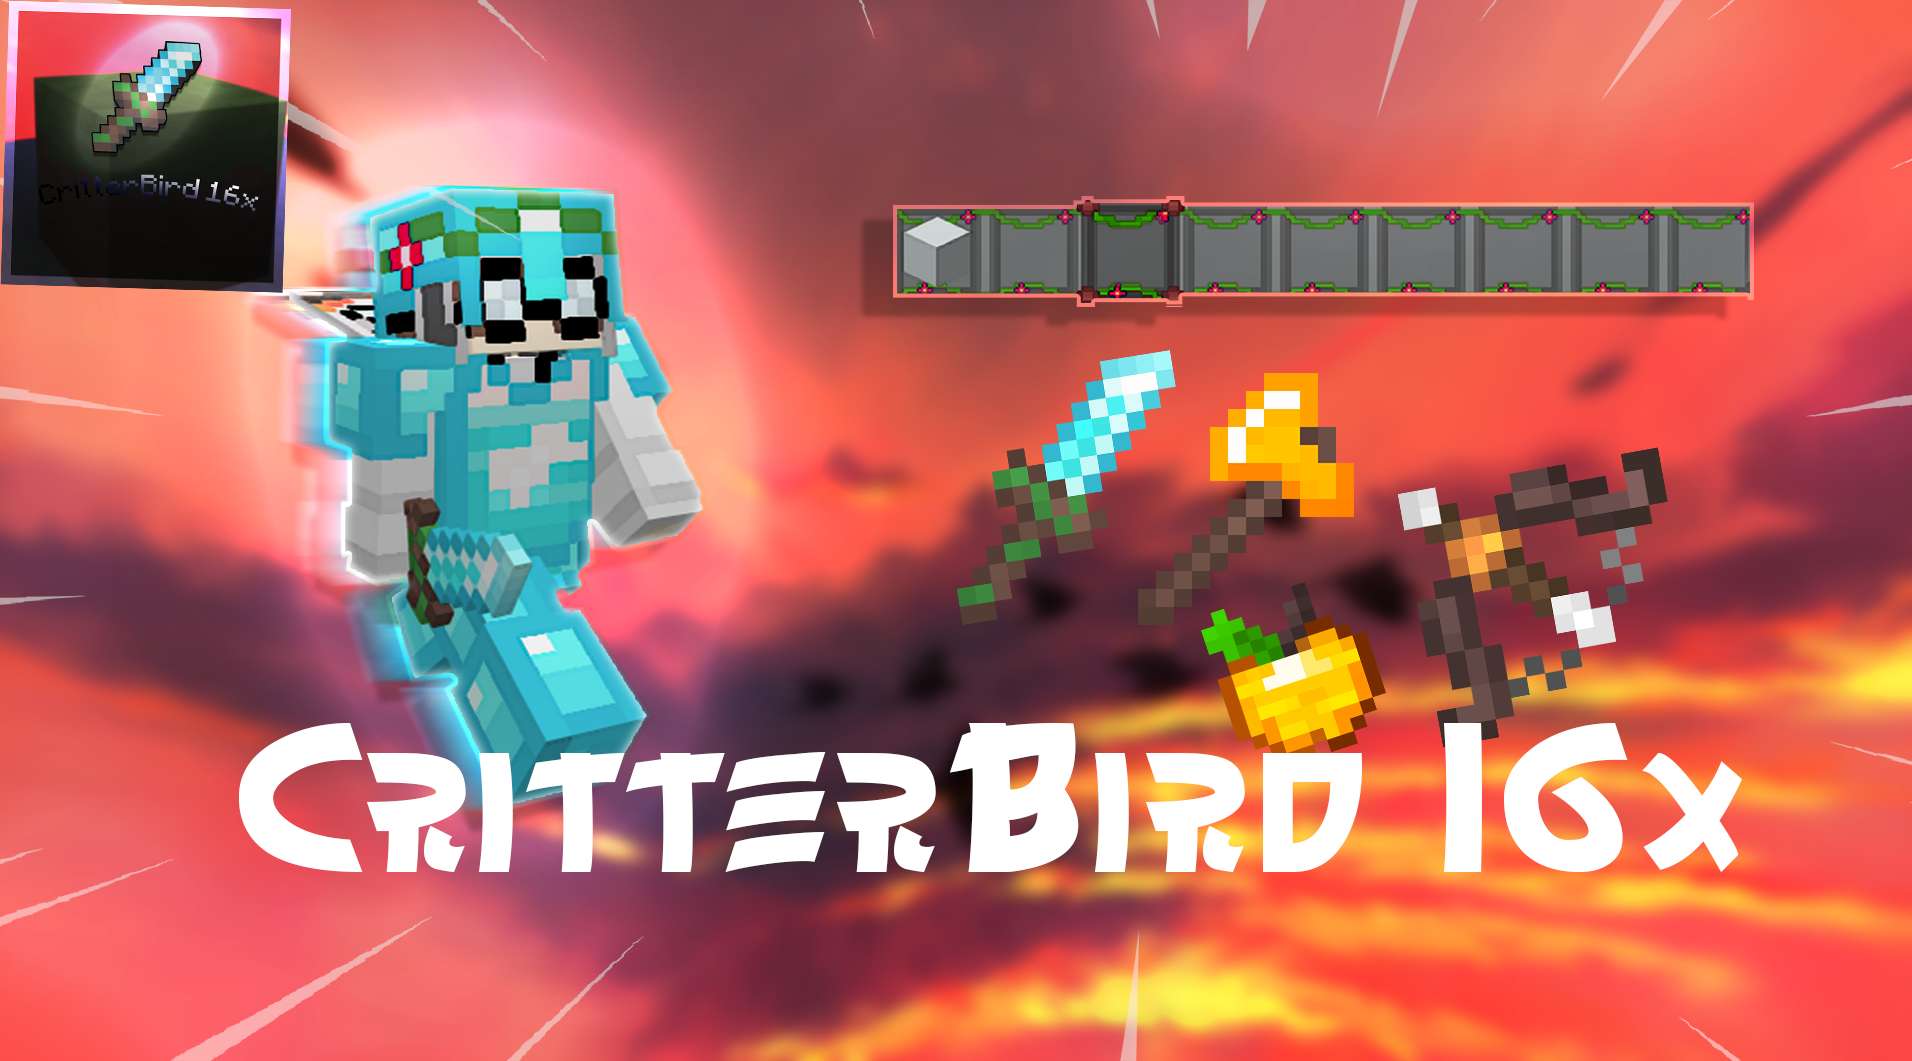 CritterBird Remastered   16x by ArKAH & by ArKAH made for CritterIsDahBird 400 sub special !  on PvPRP